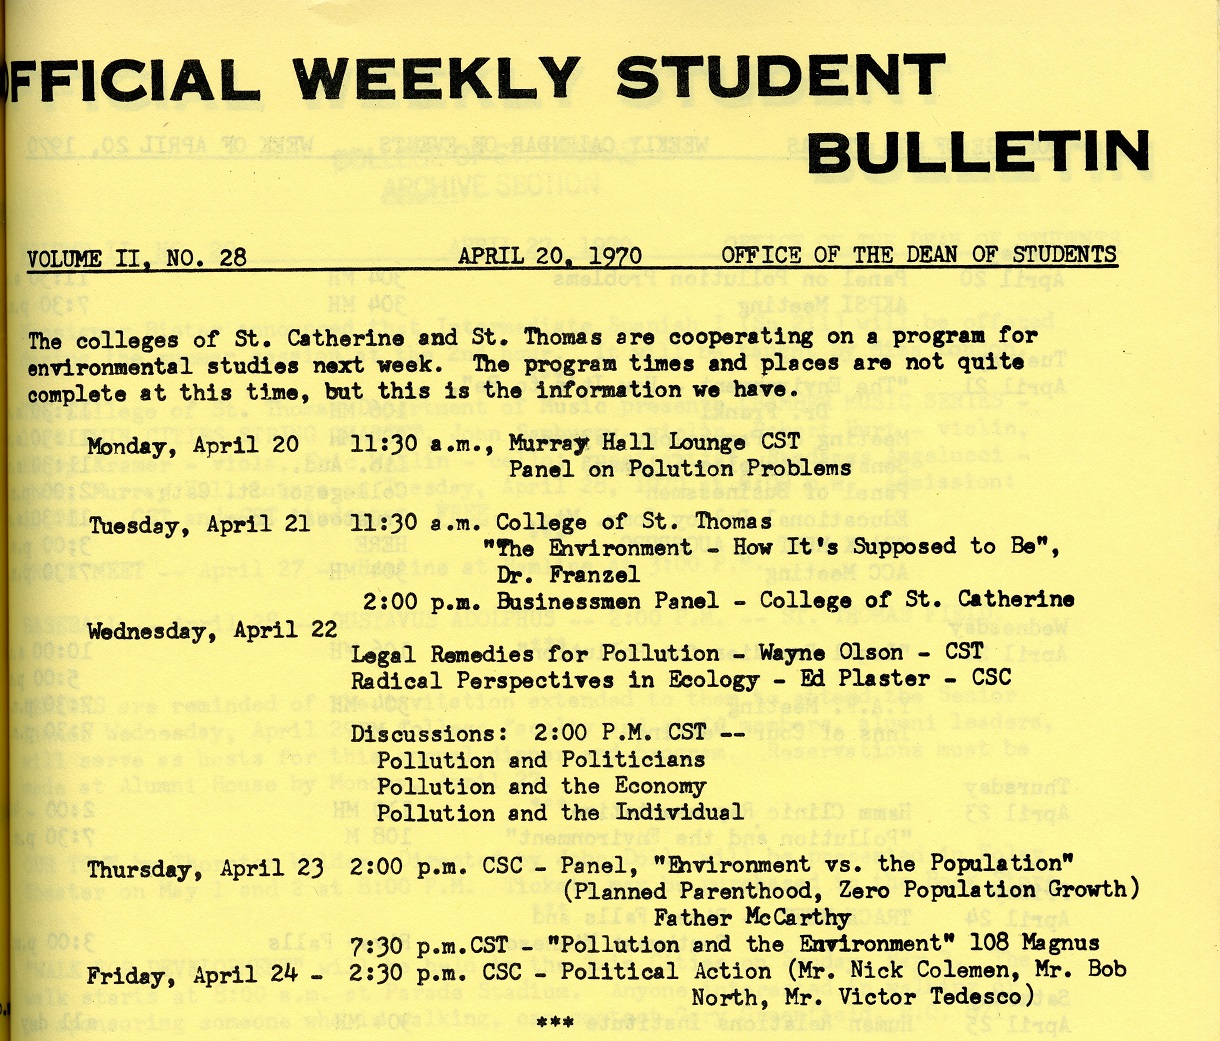 Student bulletin from April 20, 1970.